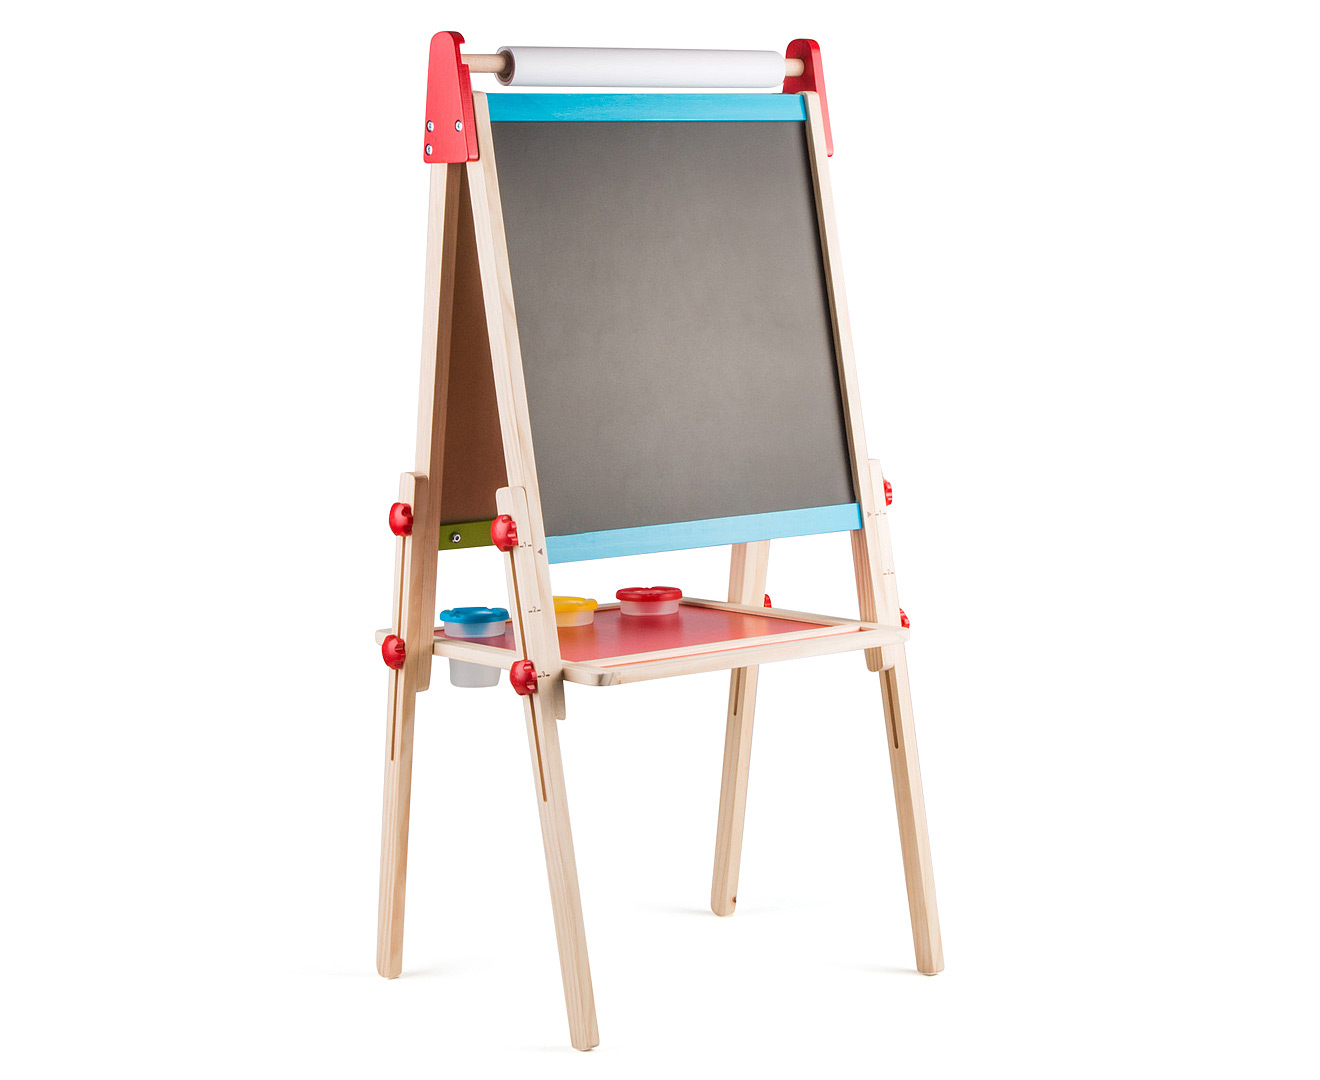 Hape All-in-One Wooden Kid's Art Easel with Paper Roll and Accessories